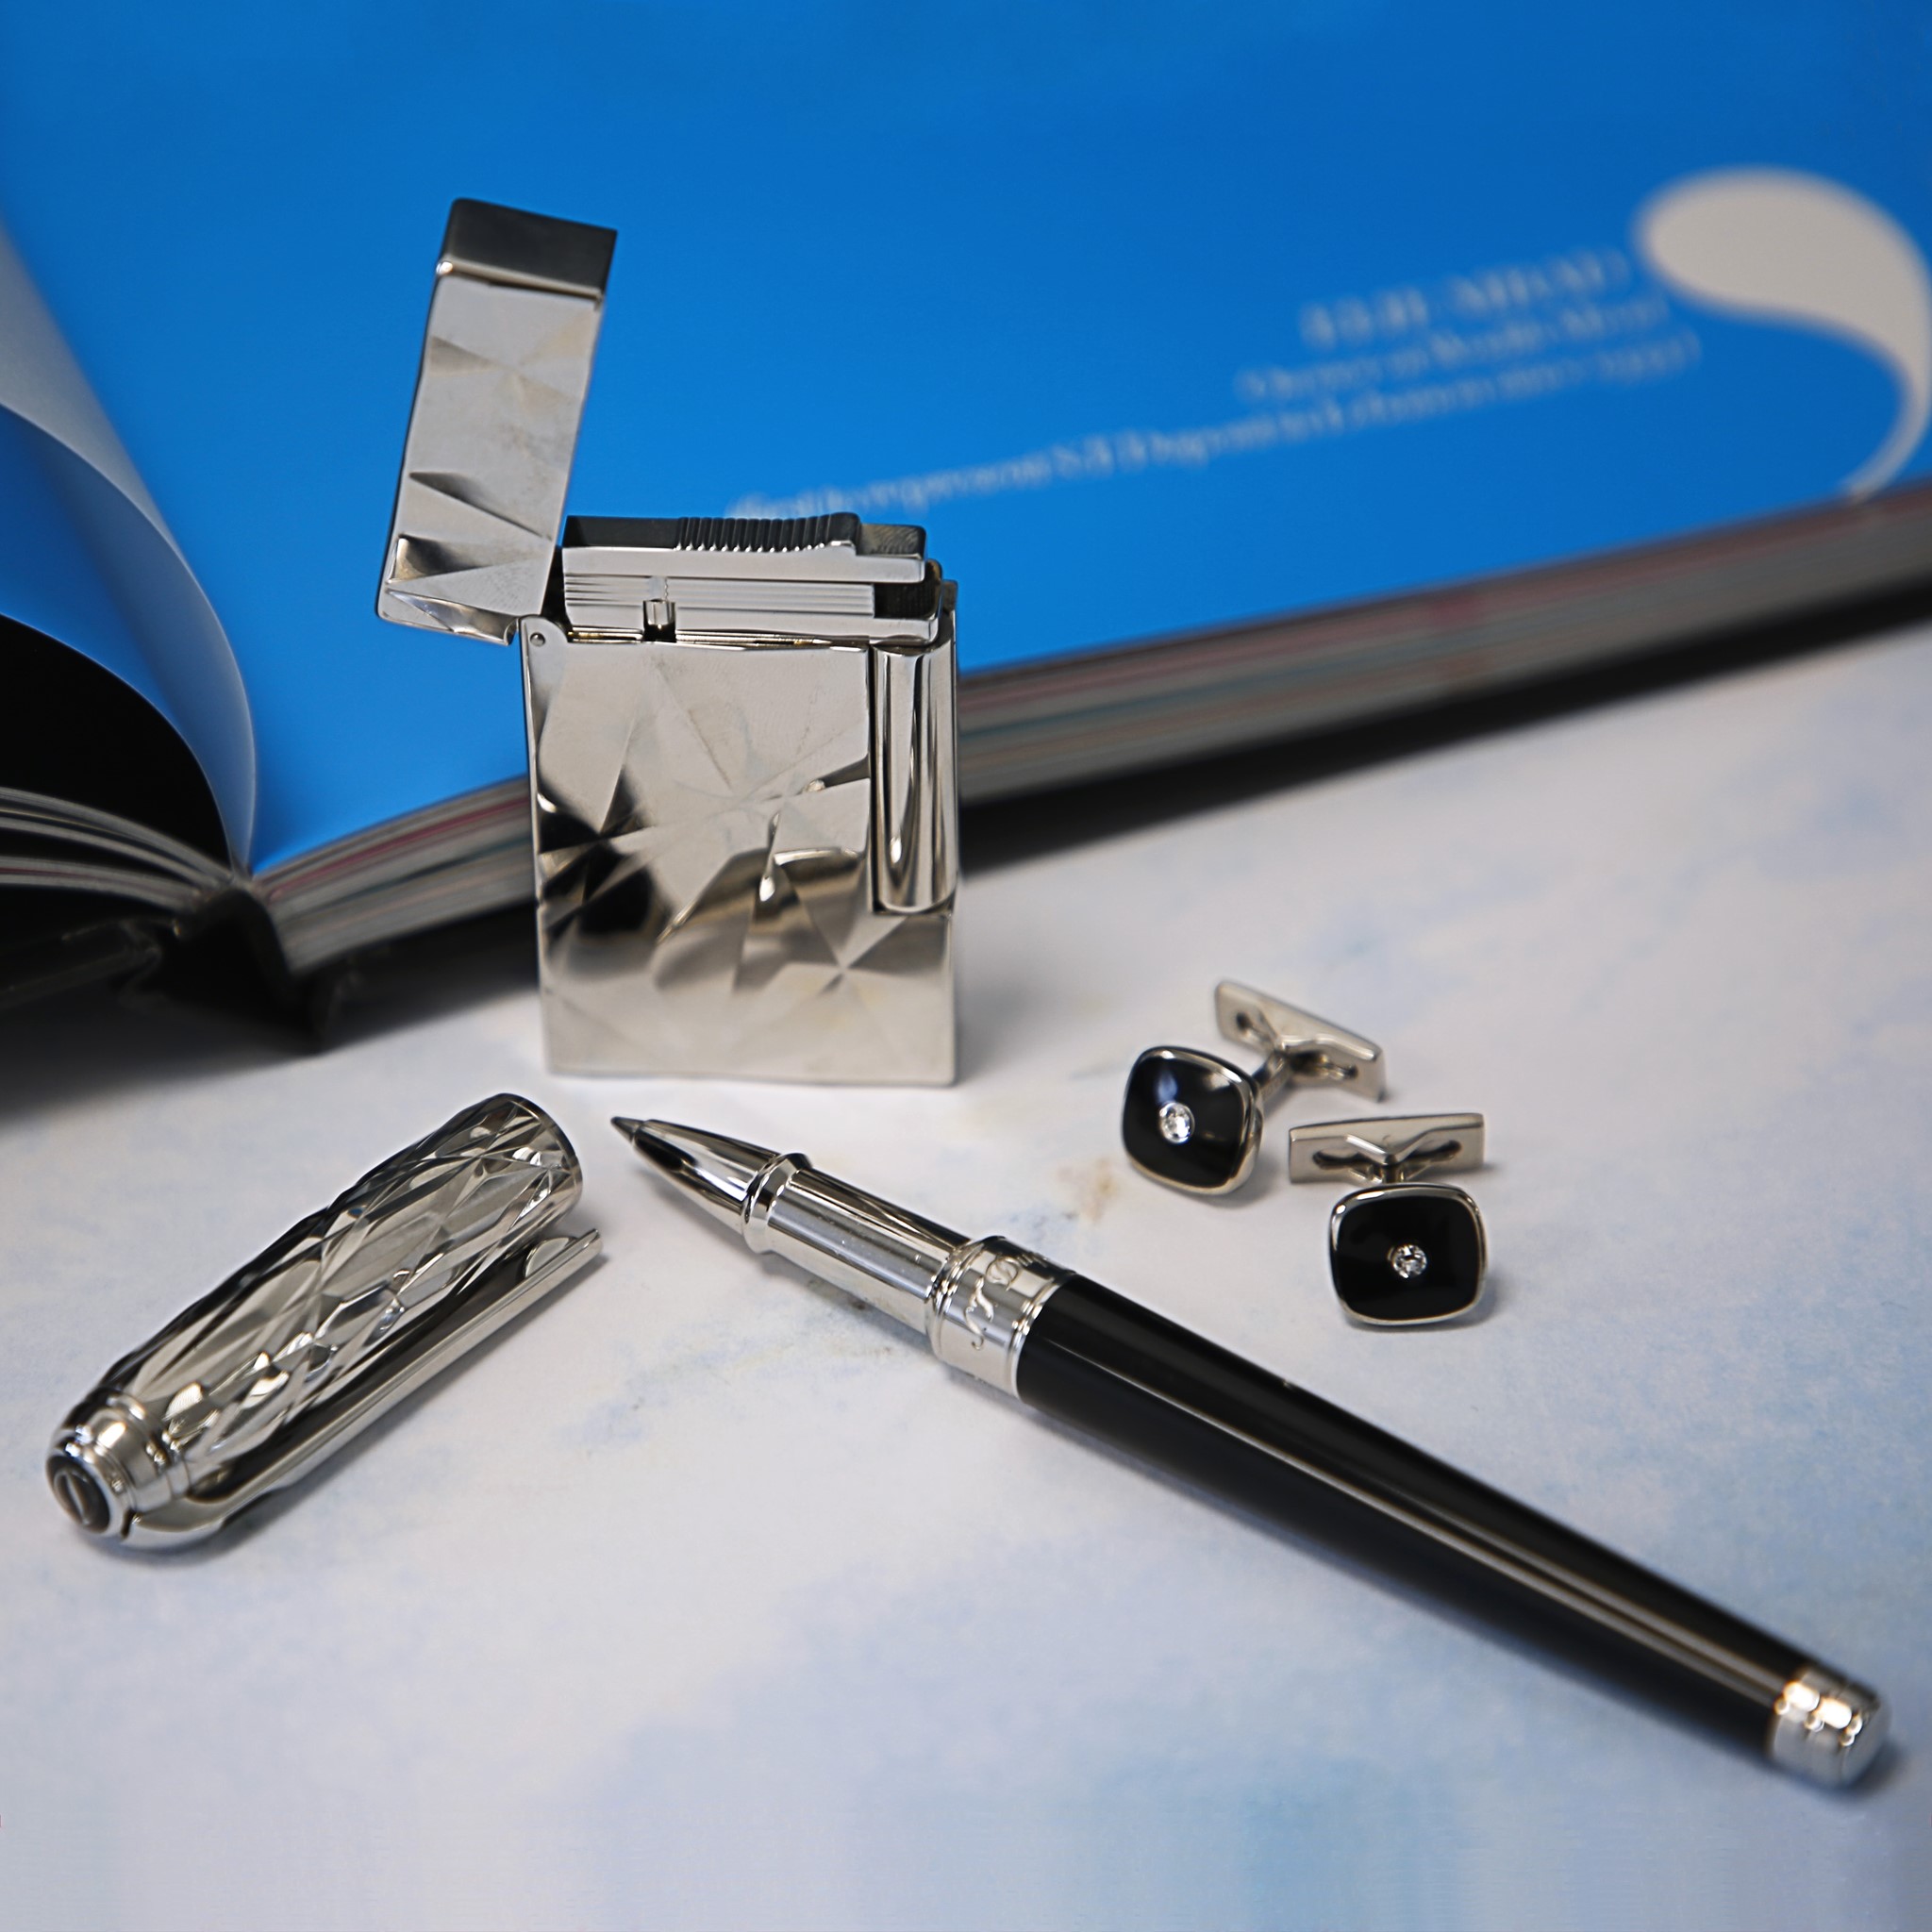 Whether it is with your lighter, pen or cufflinks, shine bright like a diamond with S.T. Dupont :